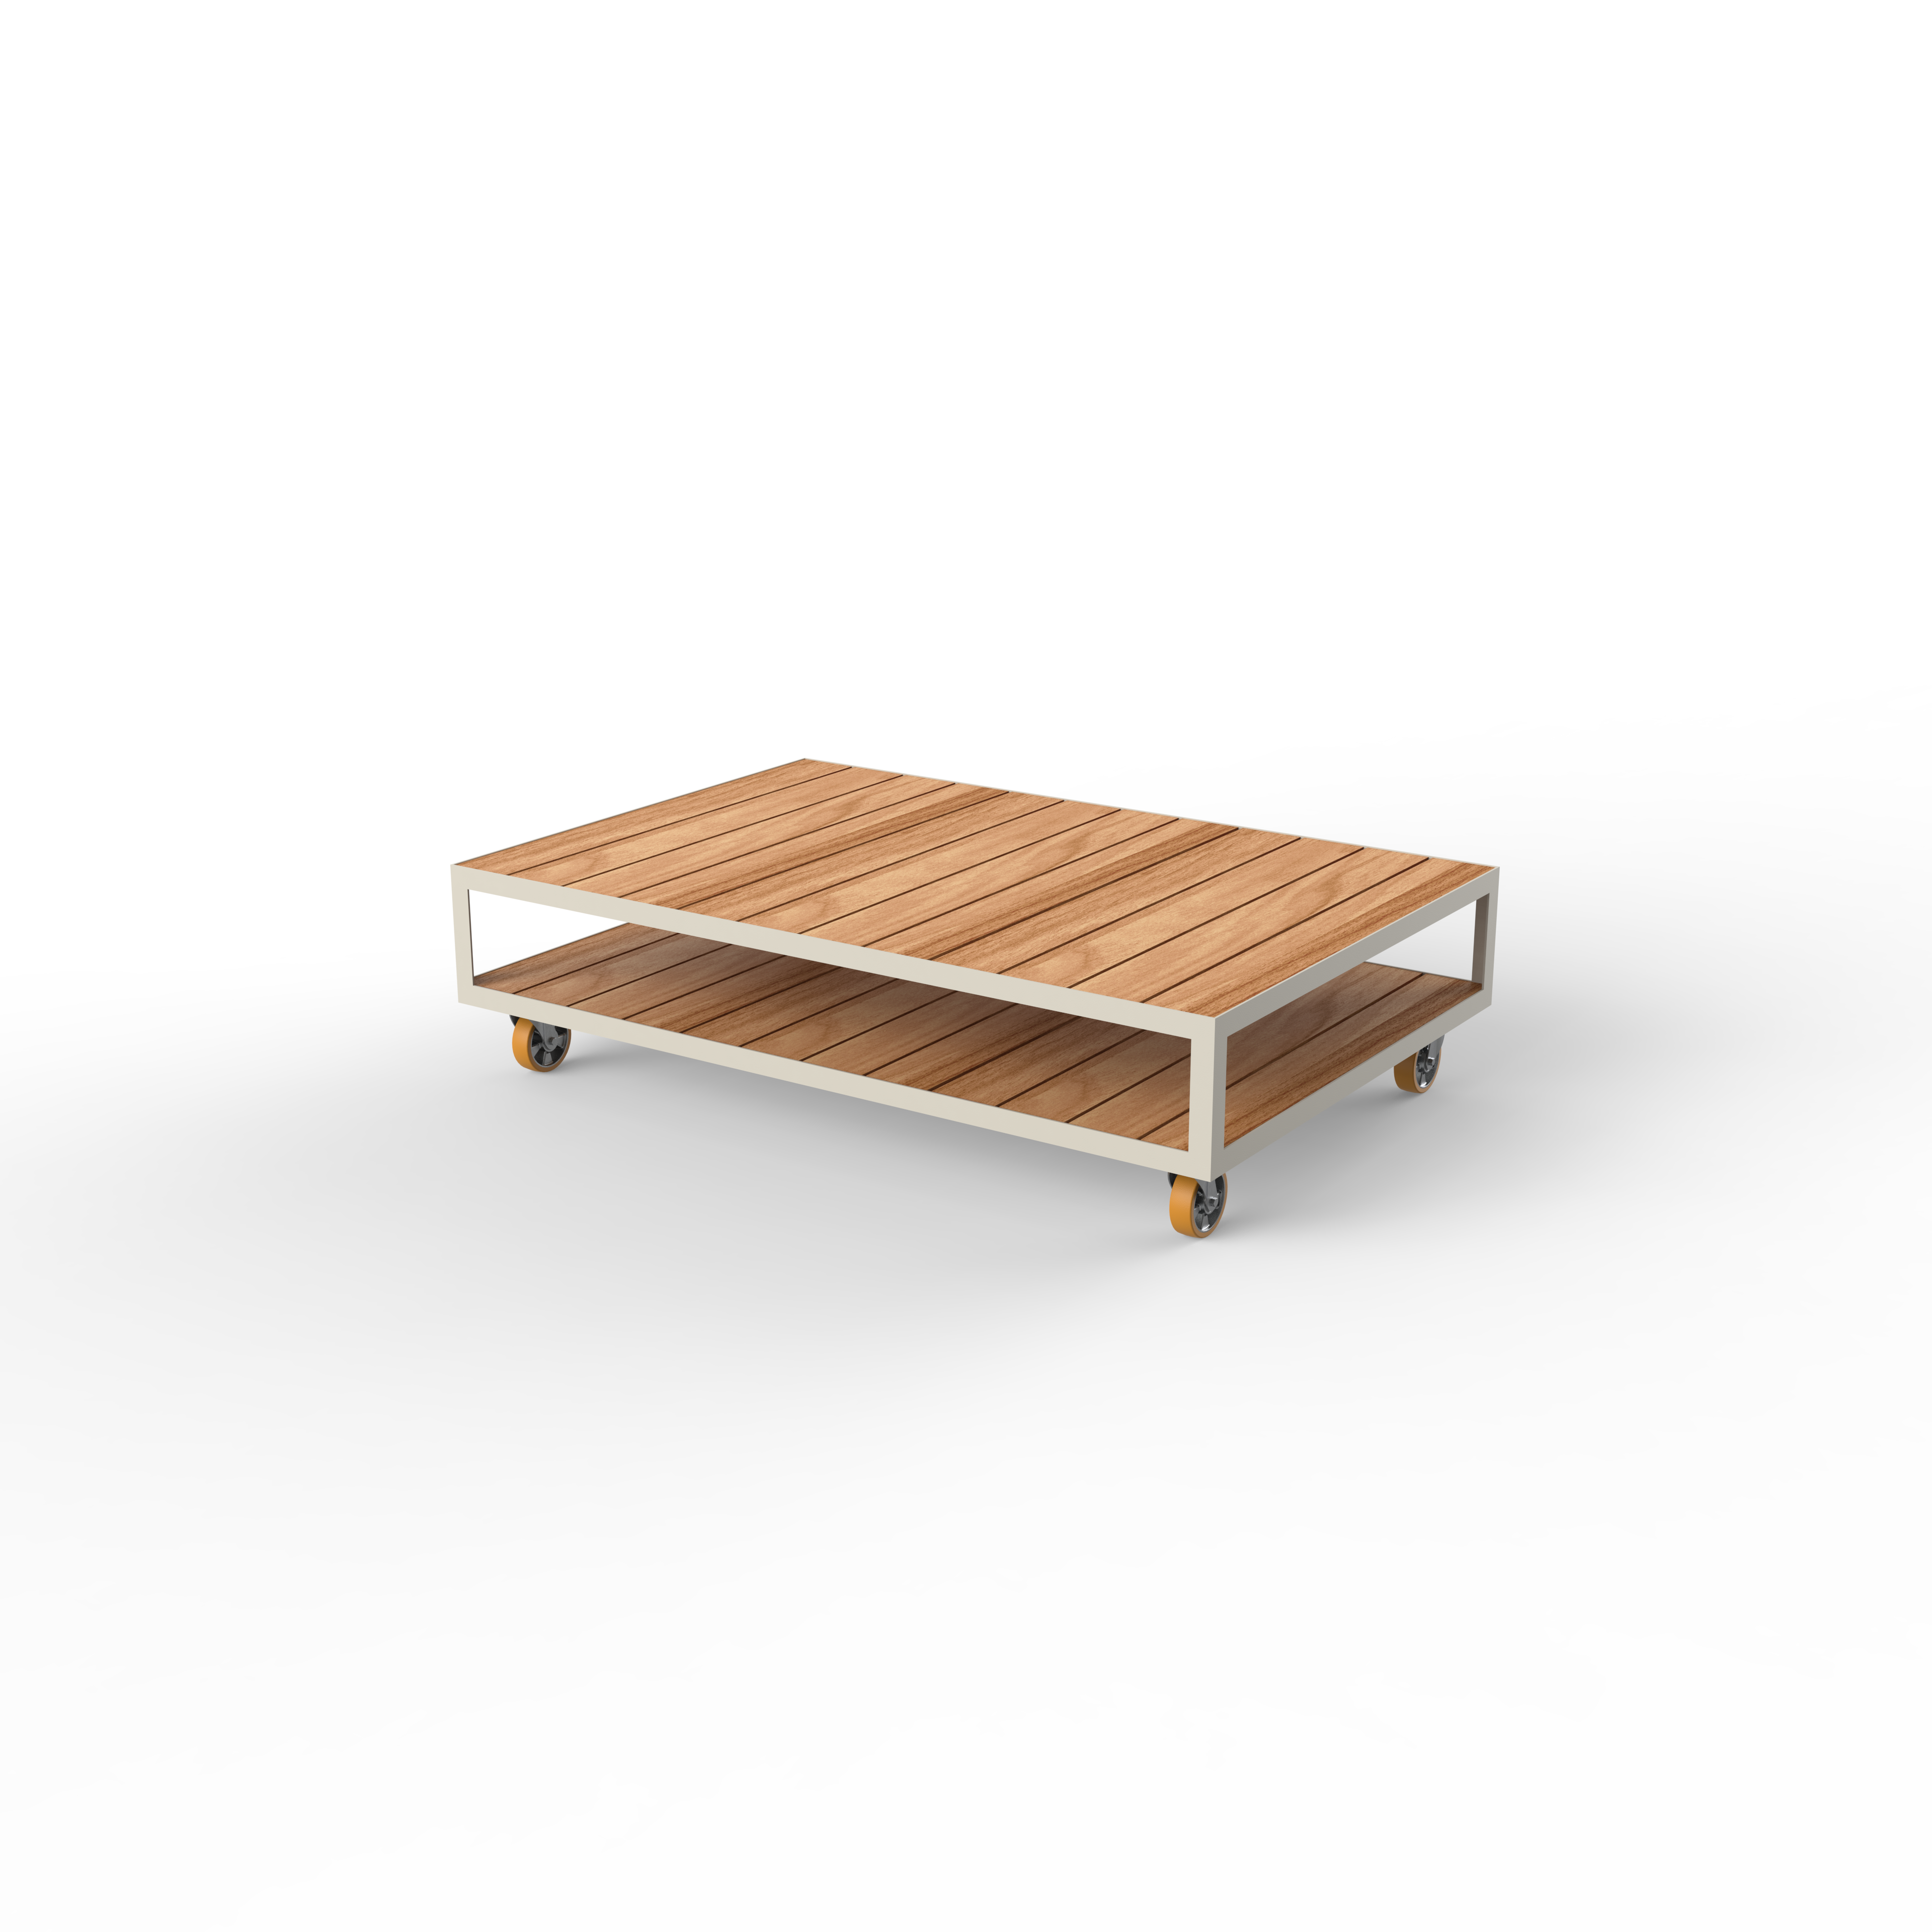 VINEYARD EXTRA-LARGE COFFEE TABLE